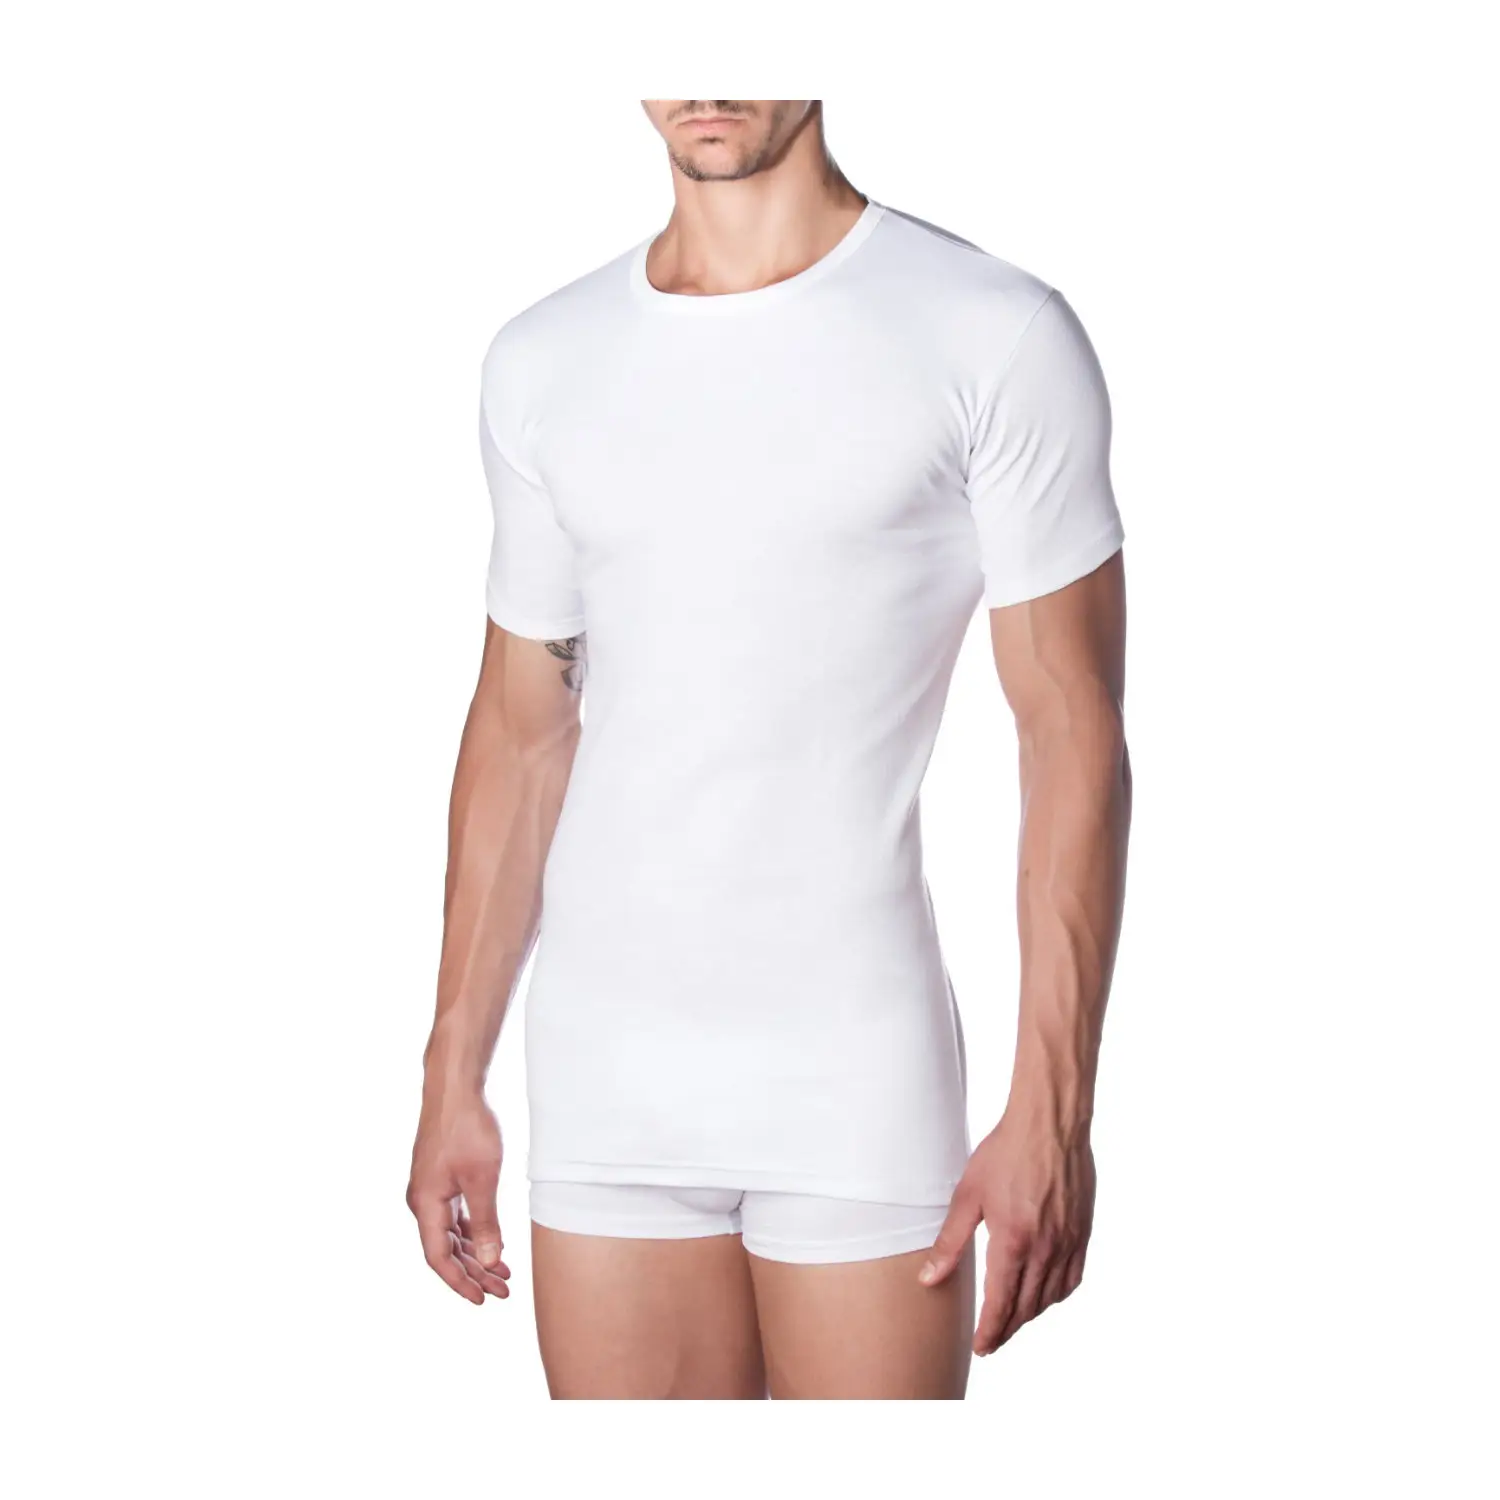 Wholesale Price Private Label Available Extralarge Size Men's Undershirt in Brushed White Cotton